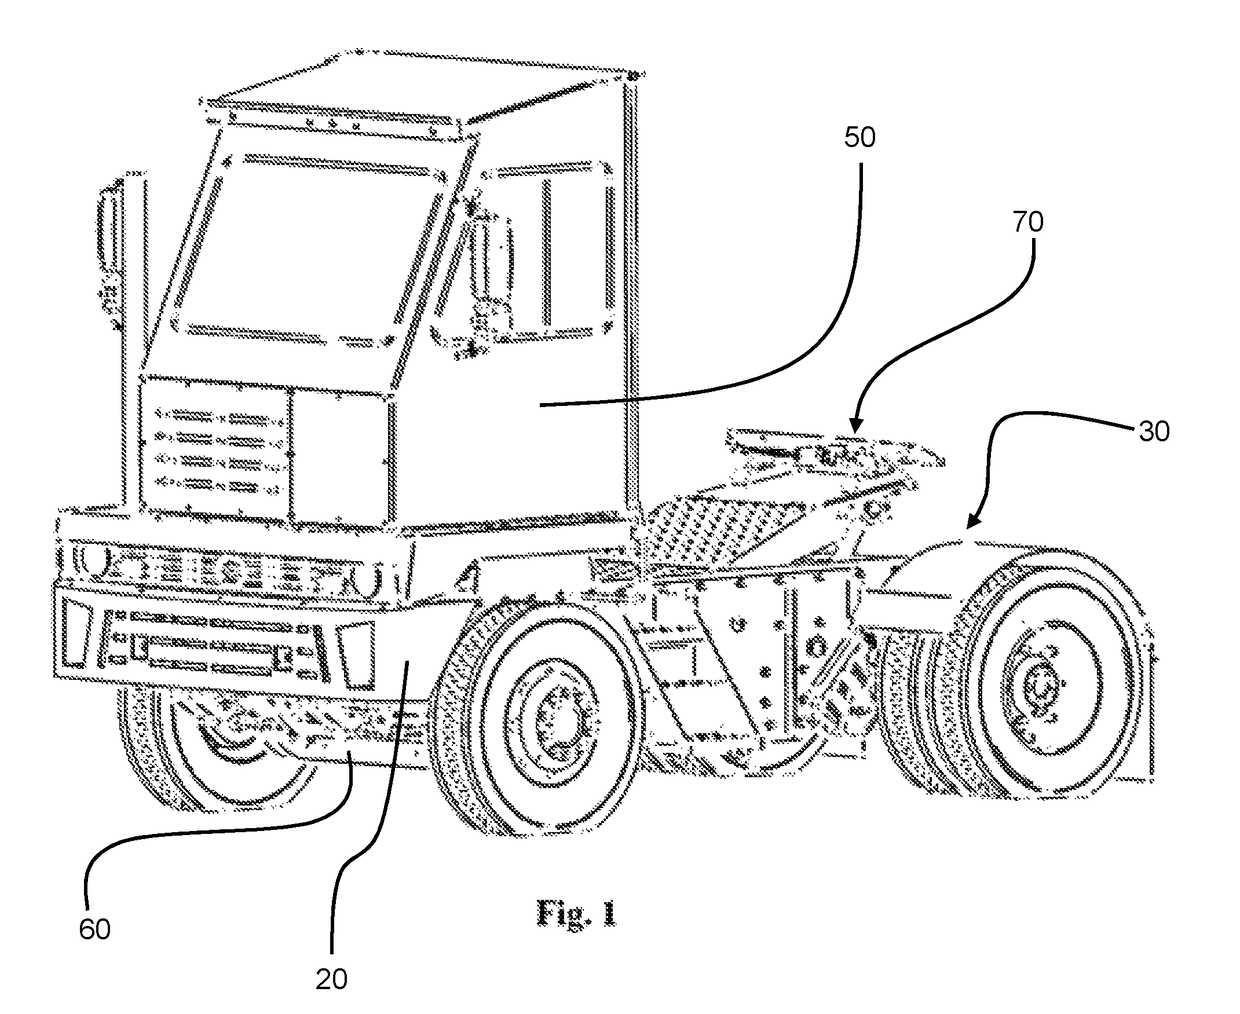 Vehicles configured for removable attachment of implements